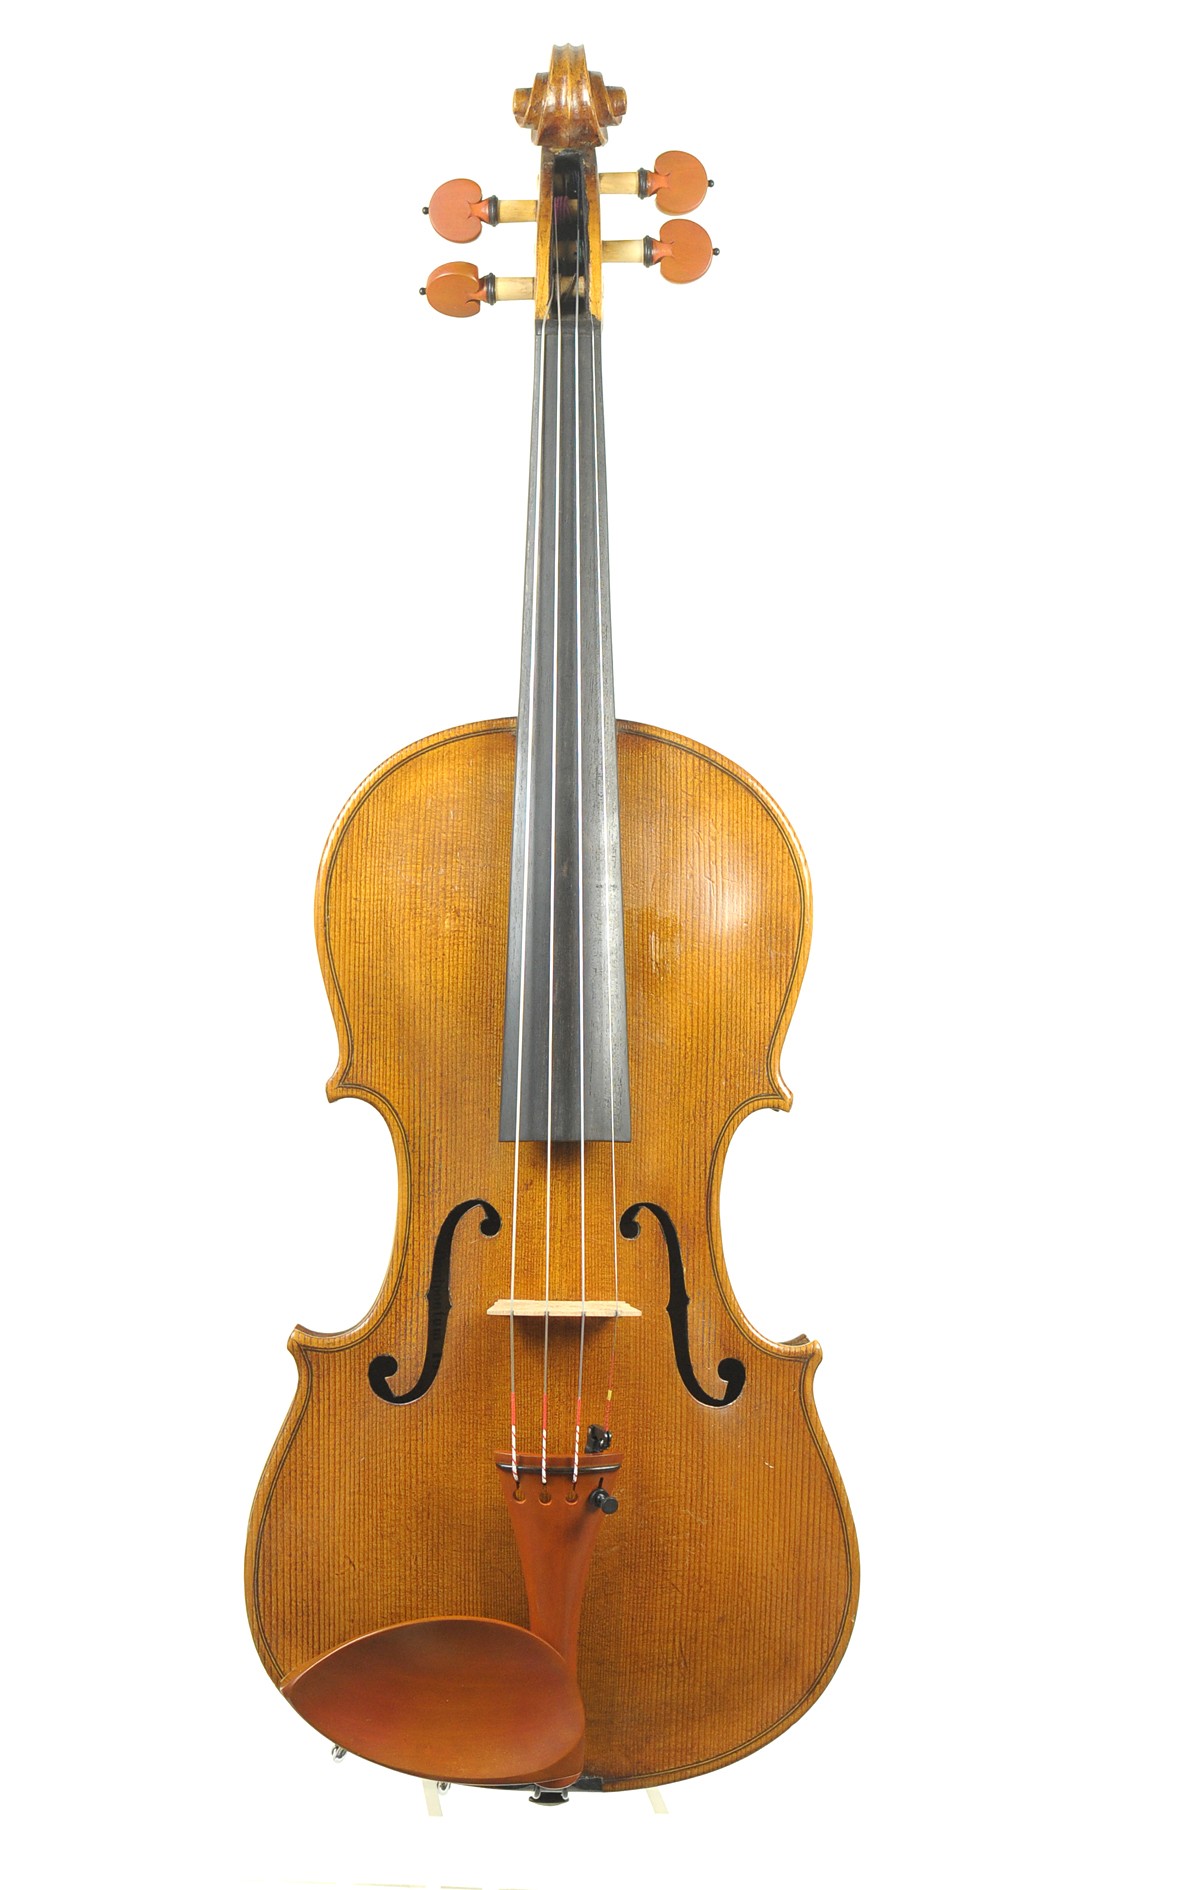 Saxon violin after Stainer, approx. 1900 - top